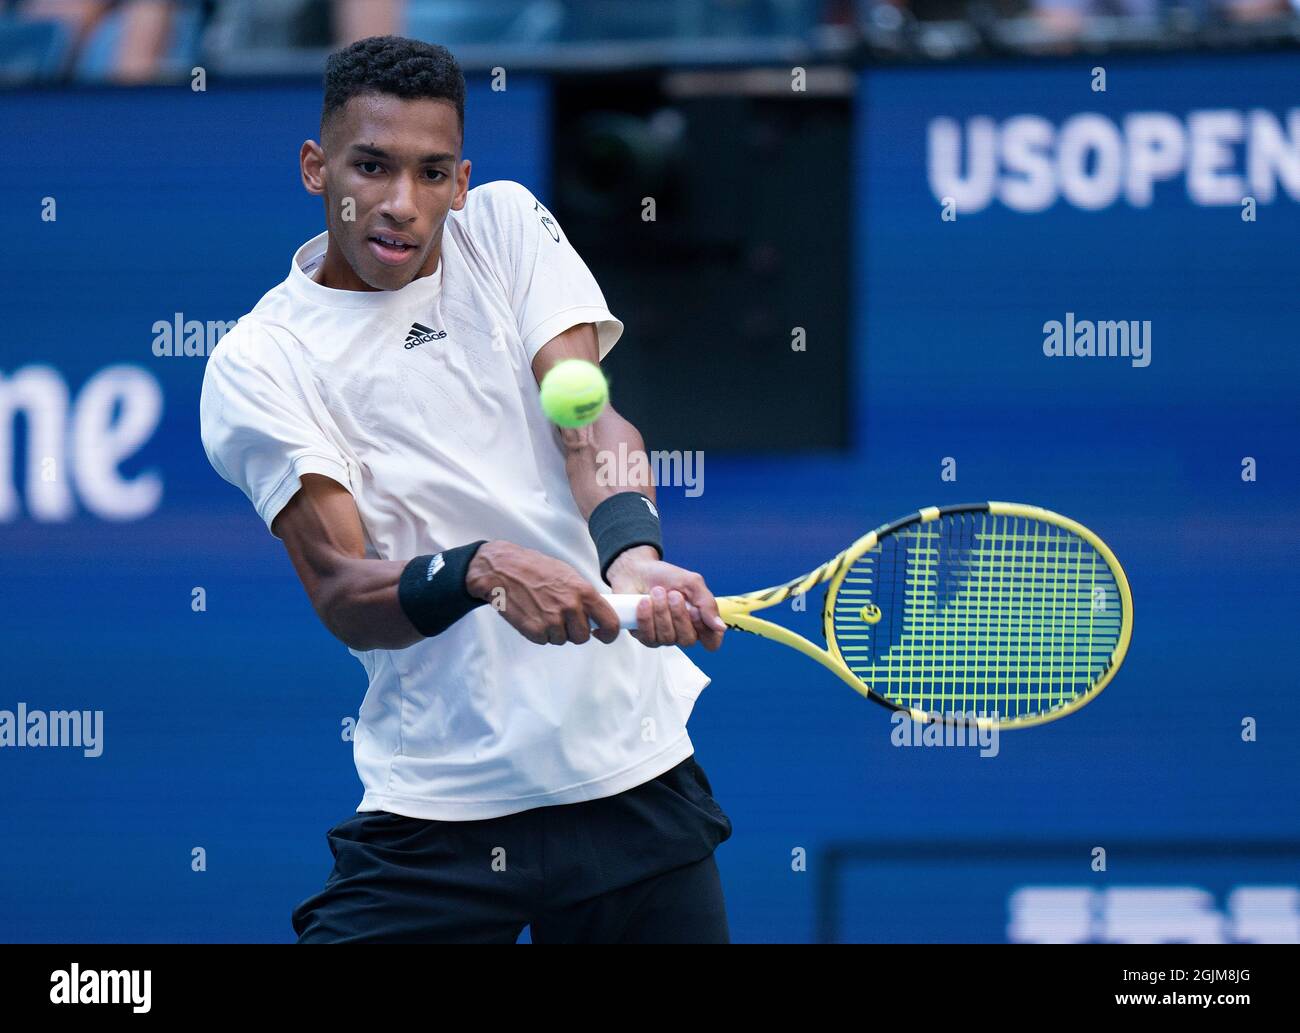 New York, USA, 10 September, 2021 Felix Auger-Aliassime (CAN) returns a shot during his semifinal match against Daniil Medvedev (RUS) on day 12 at the 2021 US Open